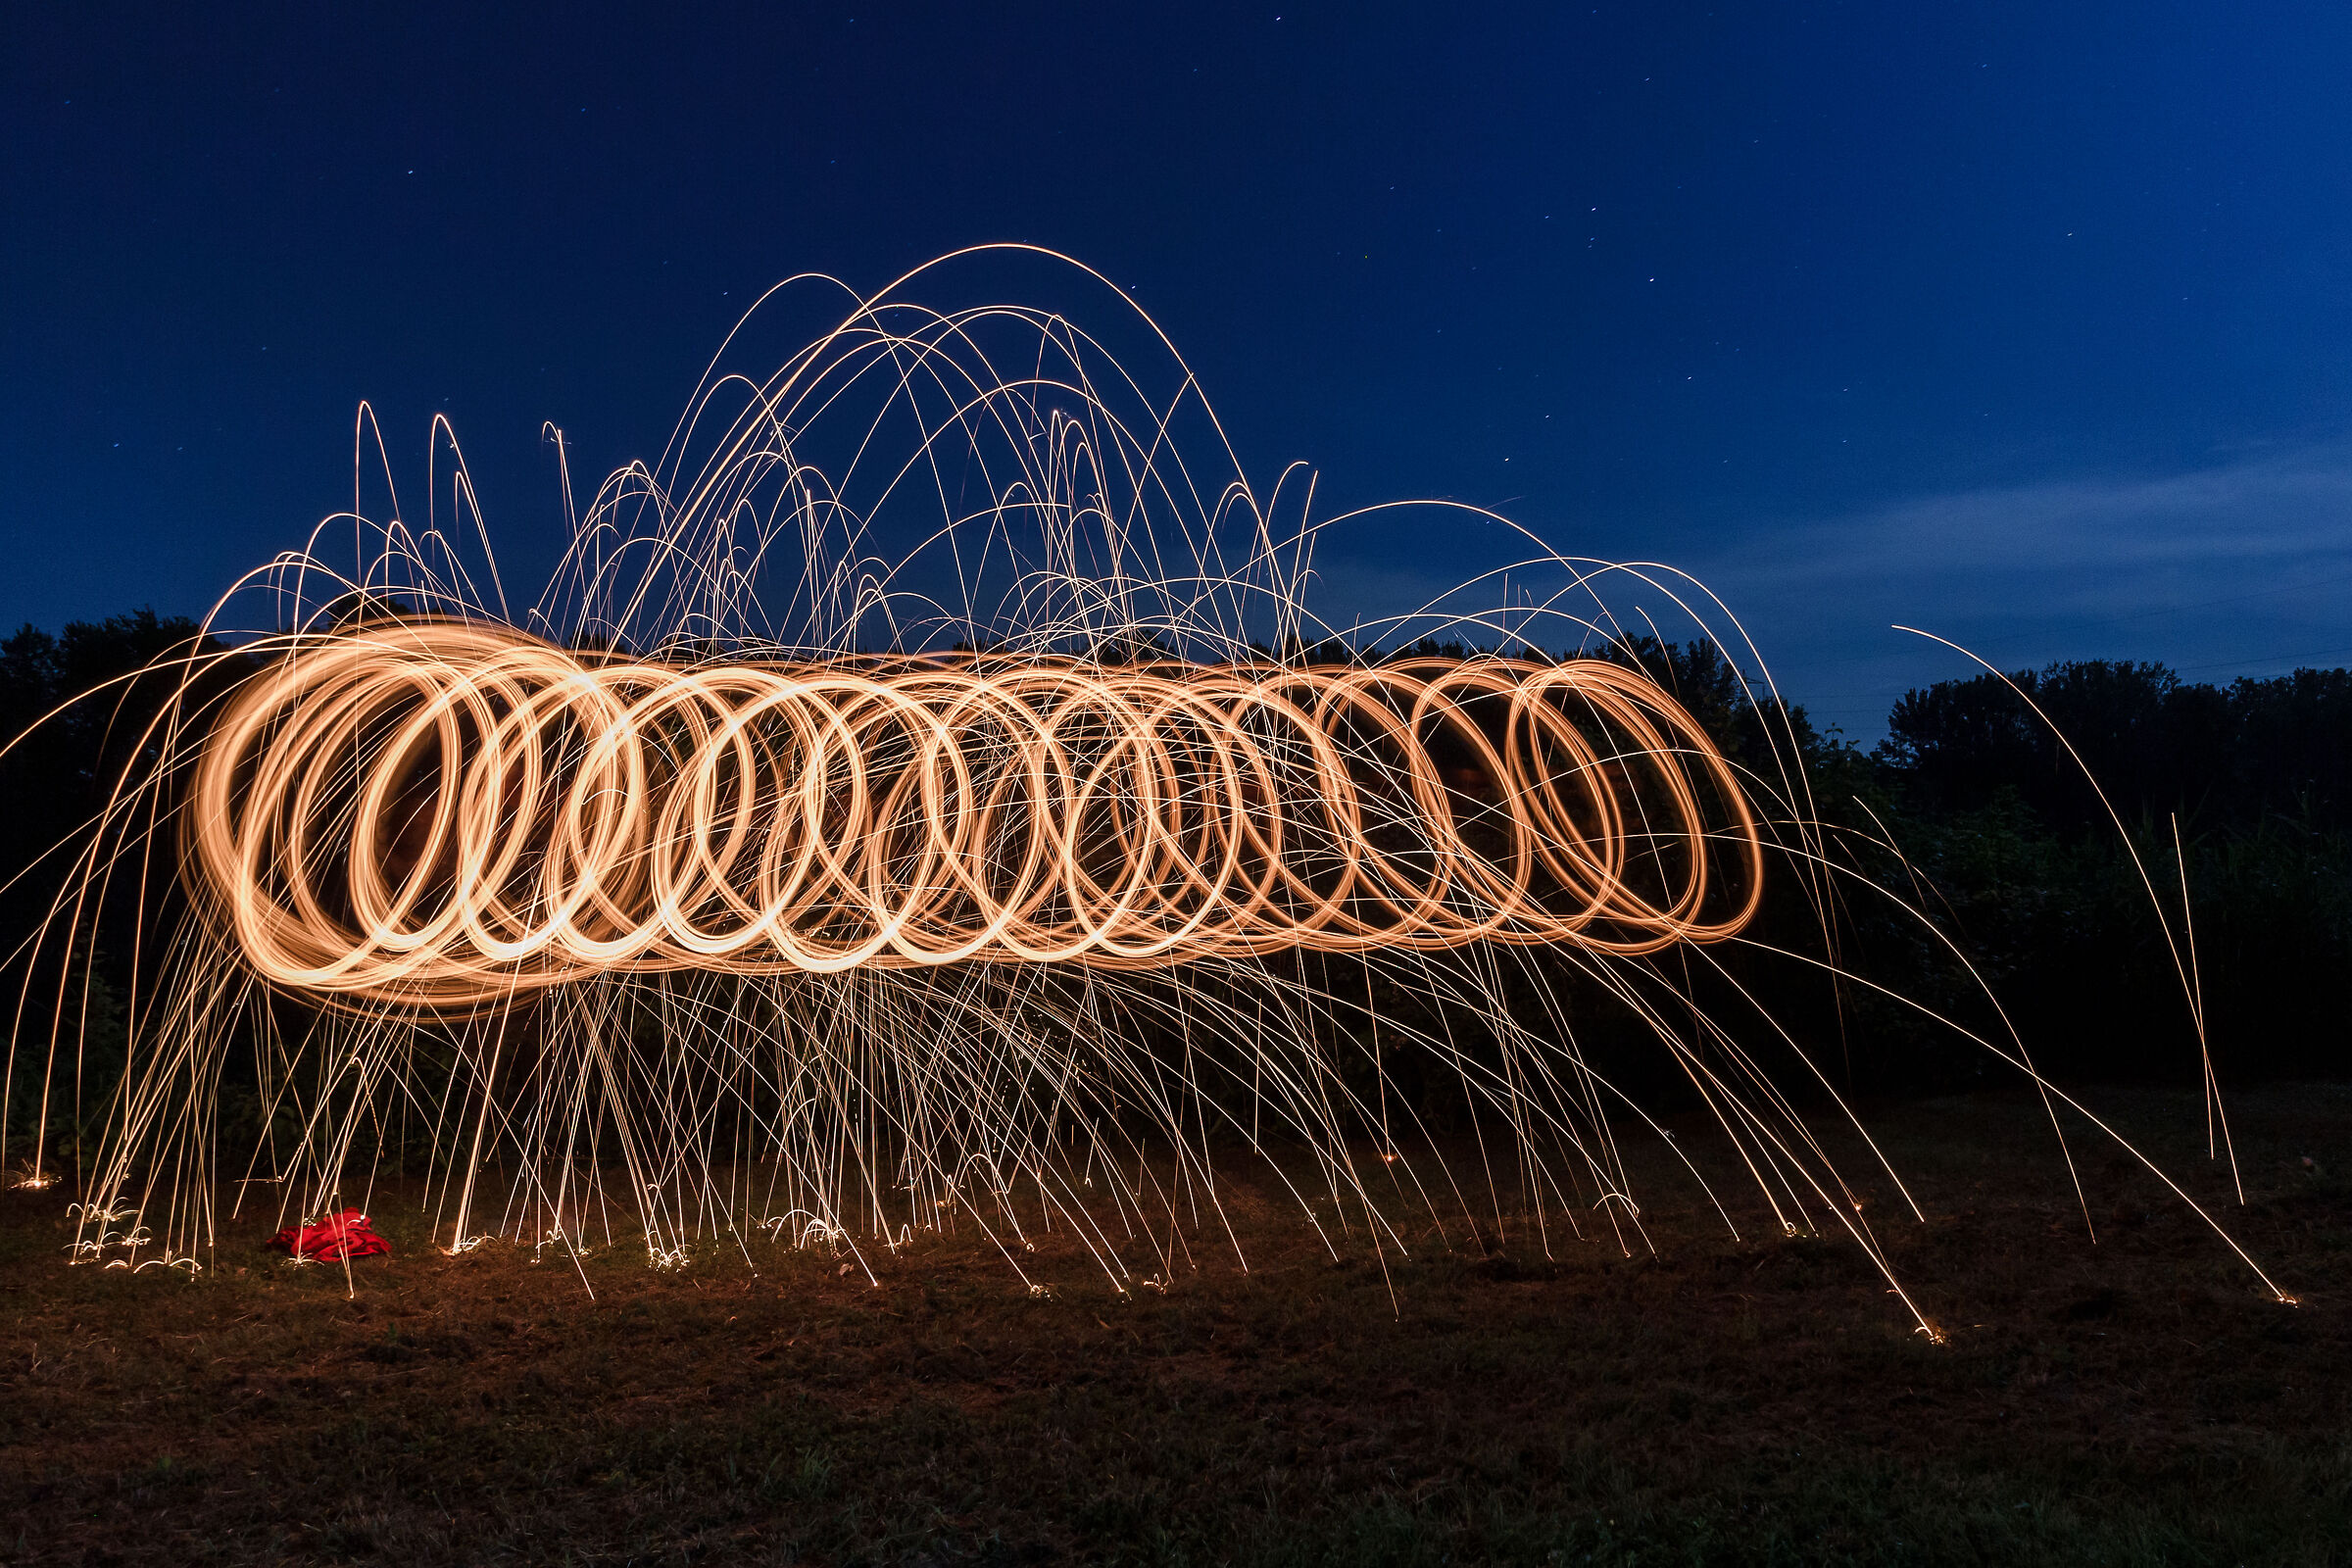 Steel Wool Photography rehearsals...